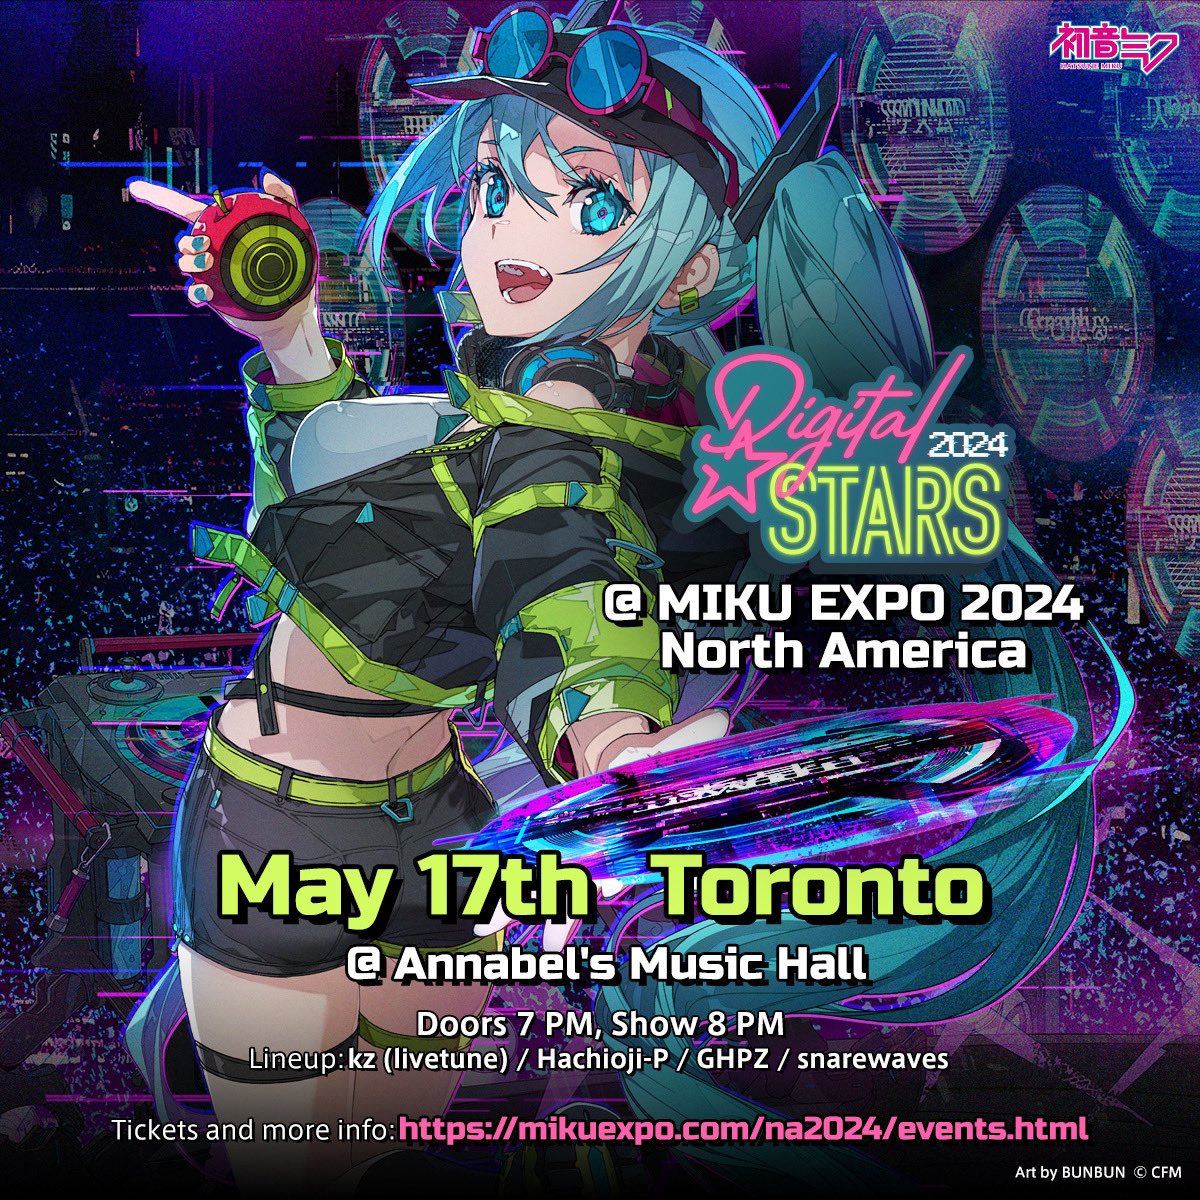 #DigitalStars @ MIKU EXPO 2024 North America The 2nd show @ The Glass House Pomona has finished. Thank you for coming and we hope you all had a blast🎉 See you in Toronto @ Annabel's Music Hall on May 17th. 🎫Ticket: x.gd/Rpsjr #DigitalStars2024 #MIKUEXPO2024